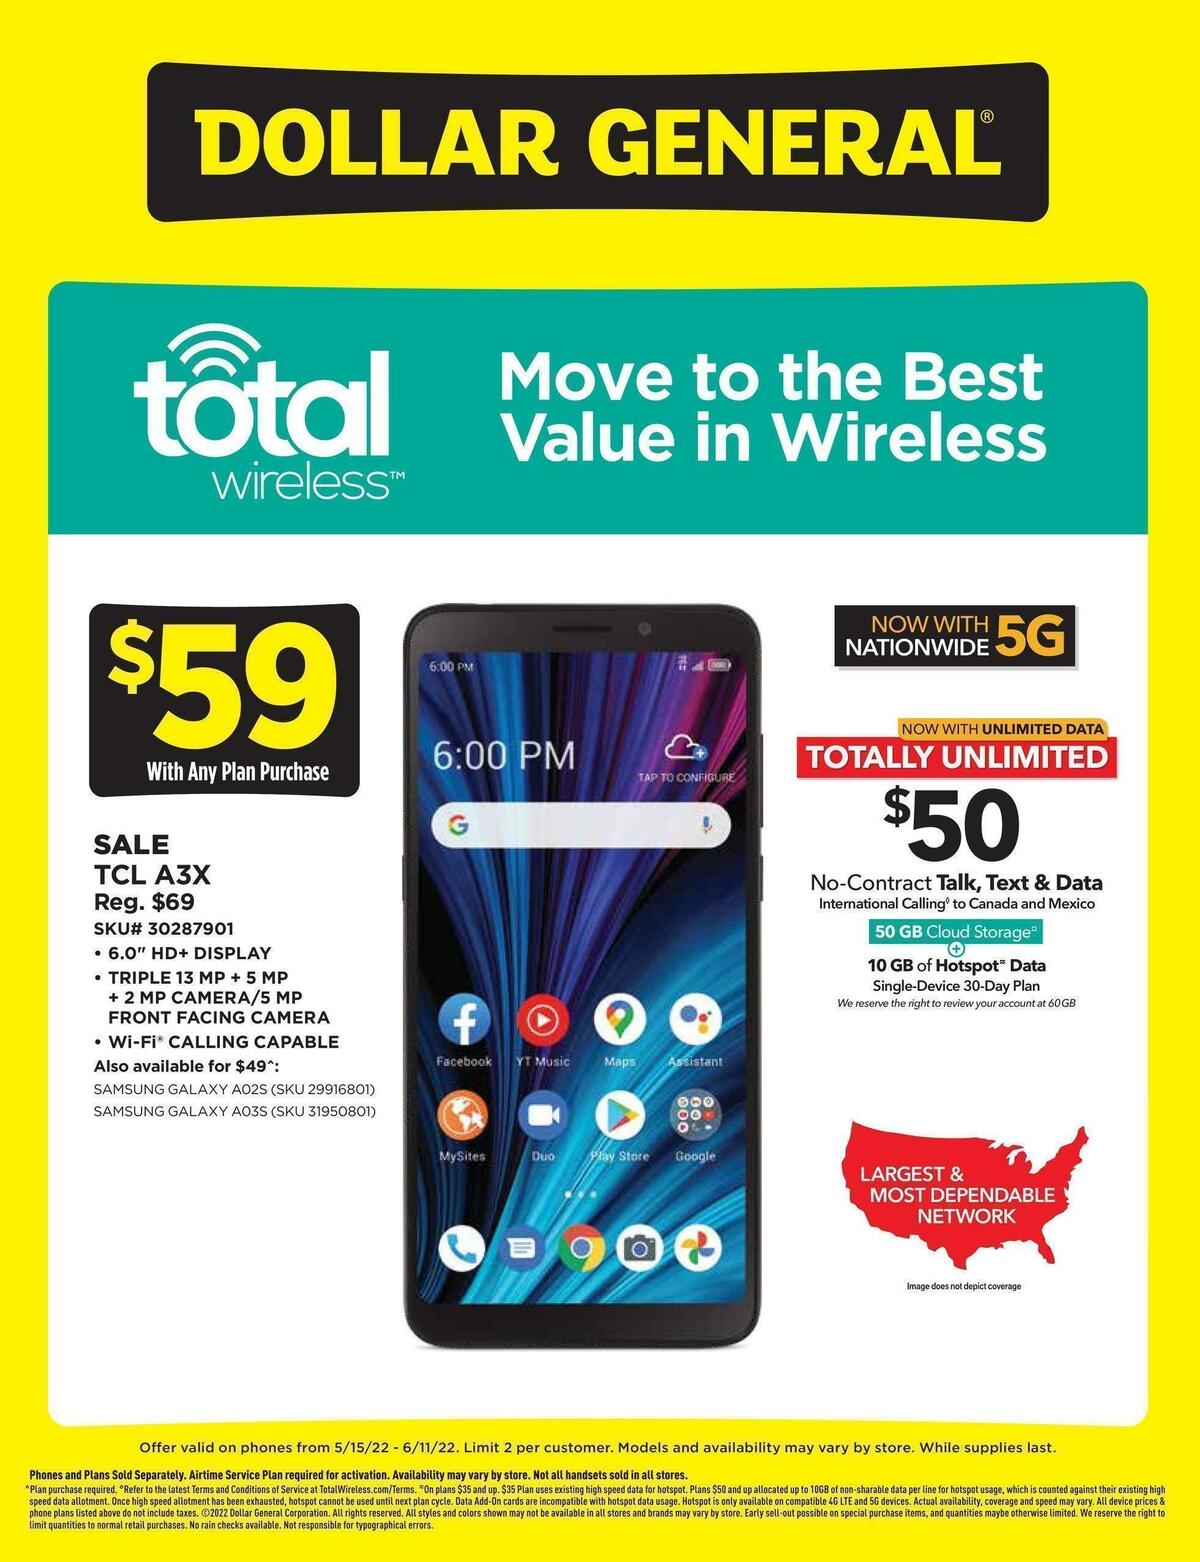 Dollar General Weekly Wireless Specials Weekly Ad from May 15